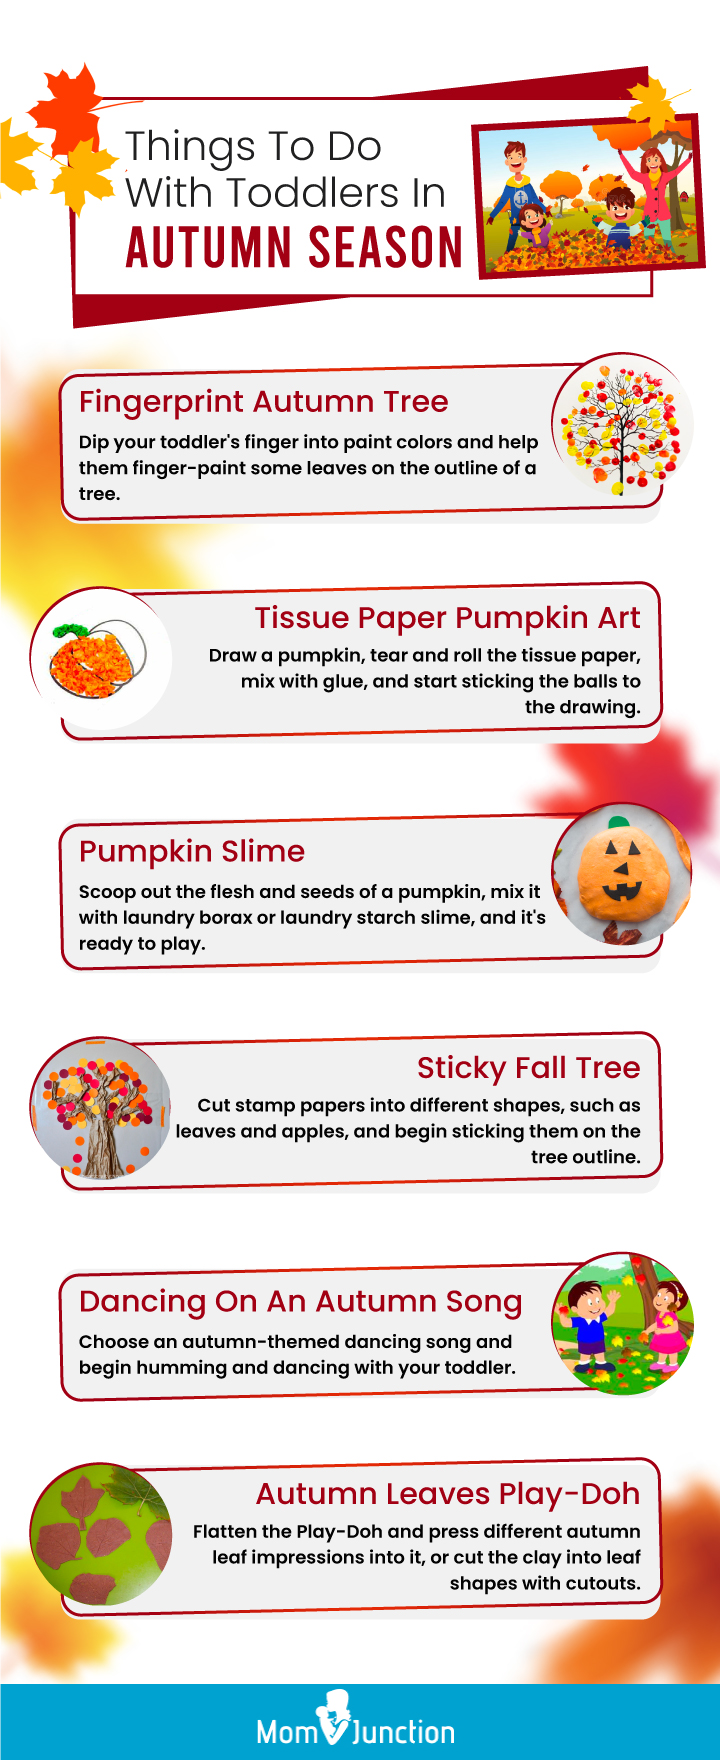 things to do with toddlers in autumn season (infographic)